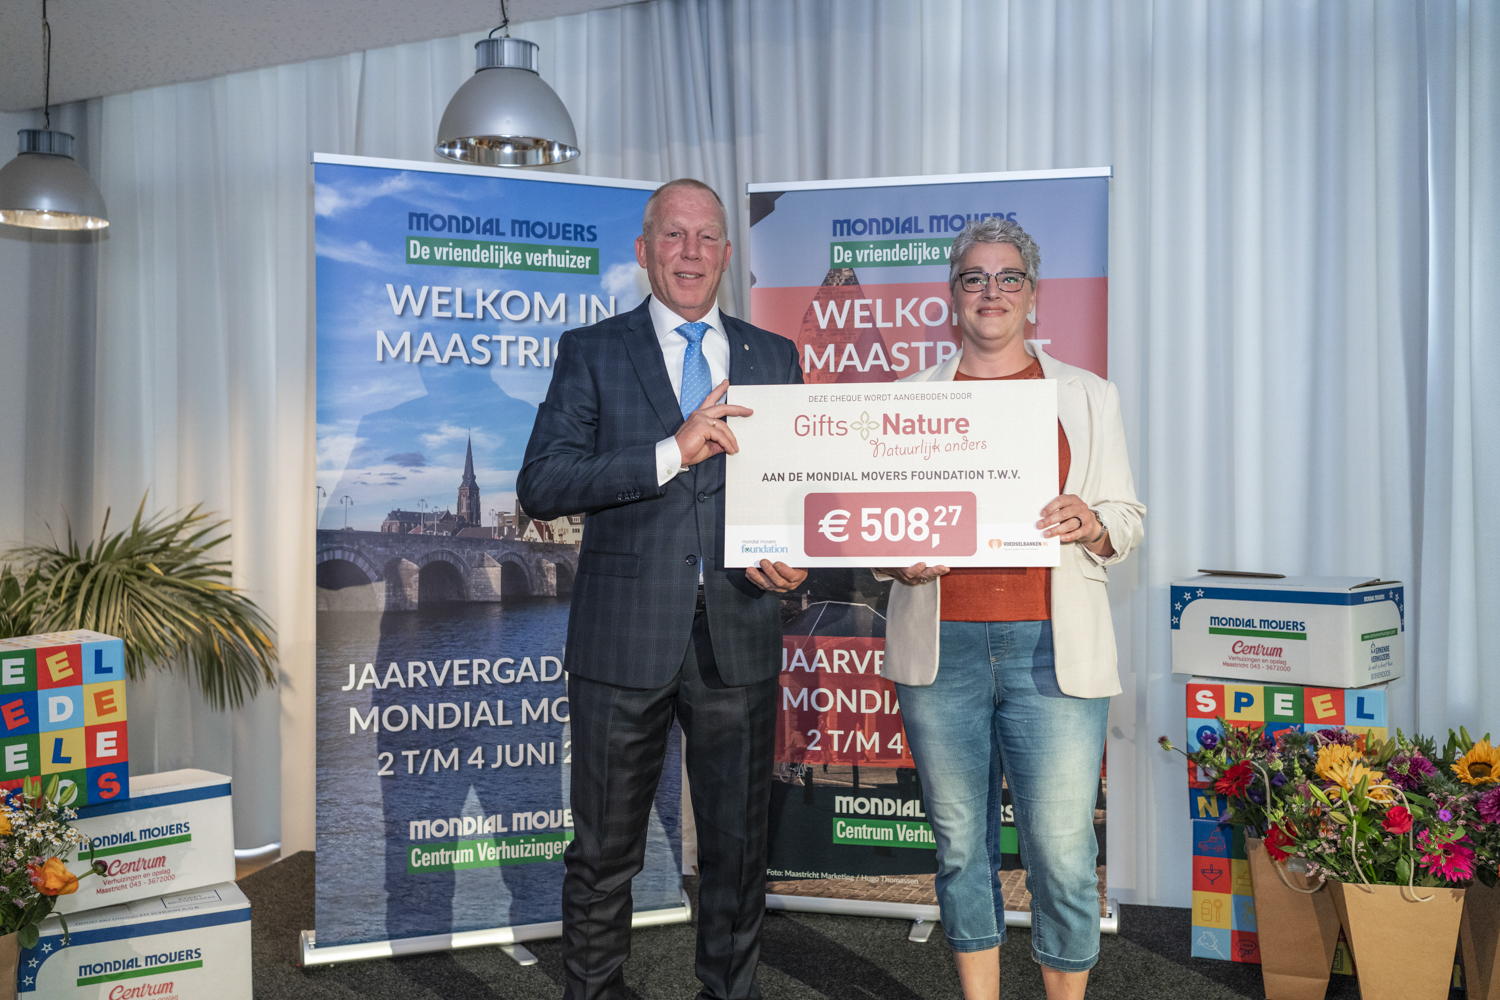 jaarvergadering Mondial Movers cheque Gifts & Nature